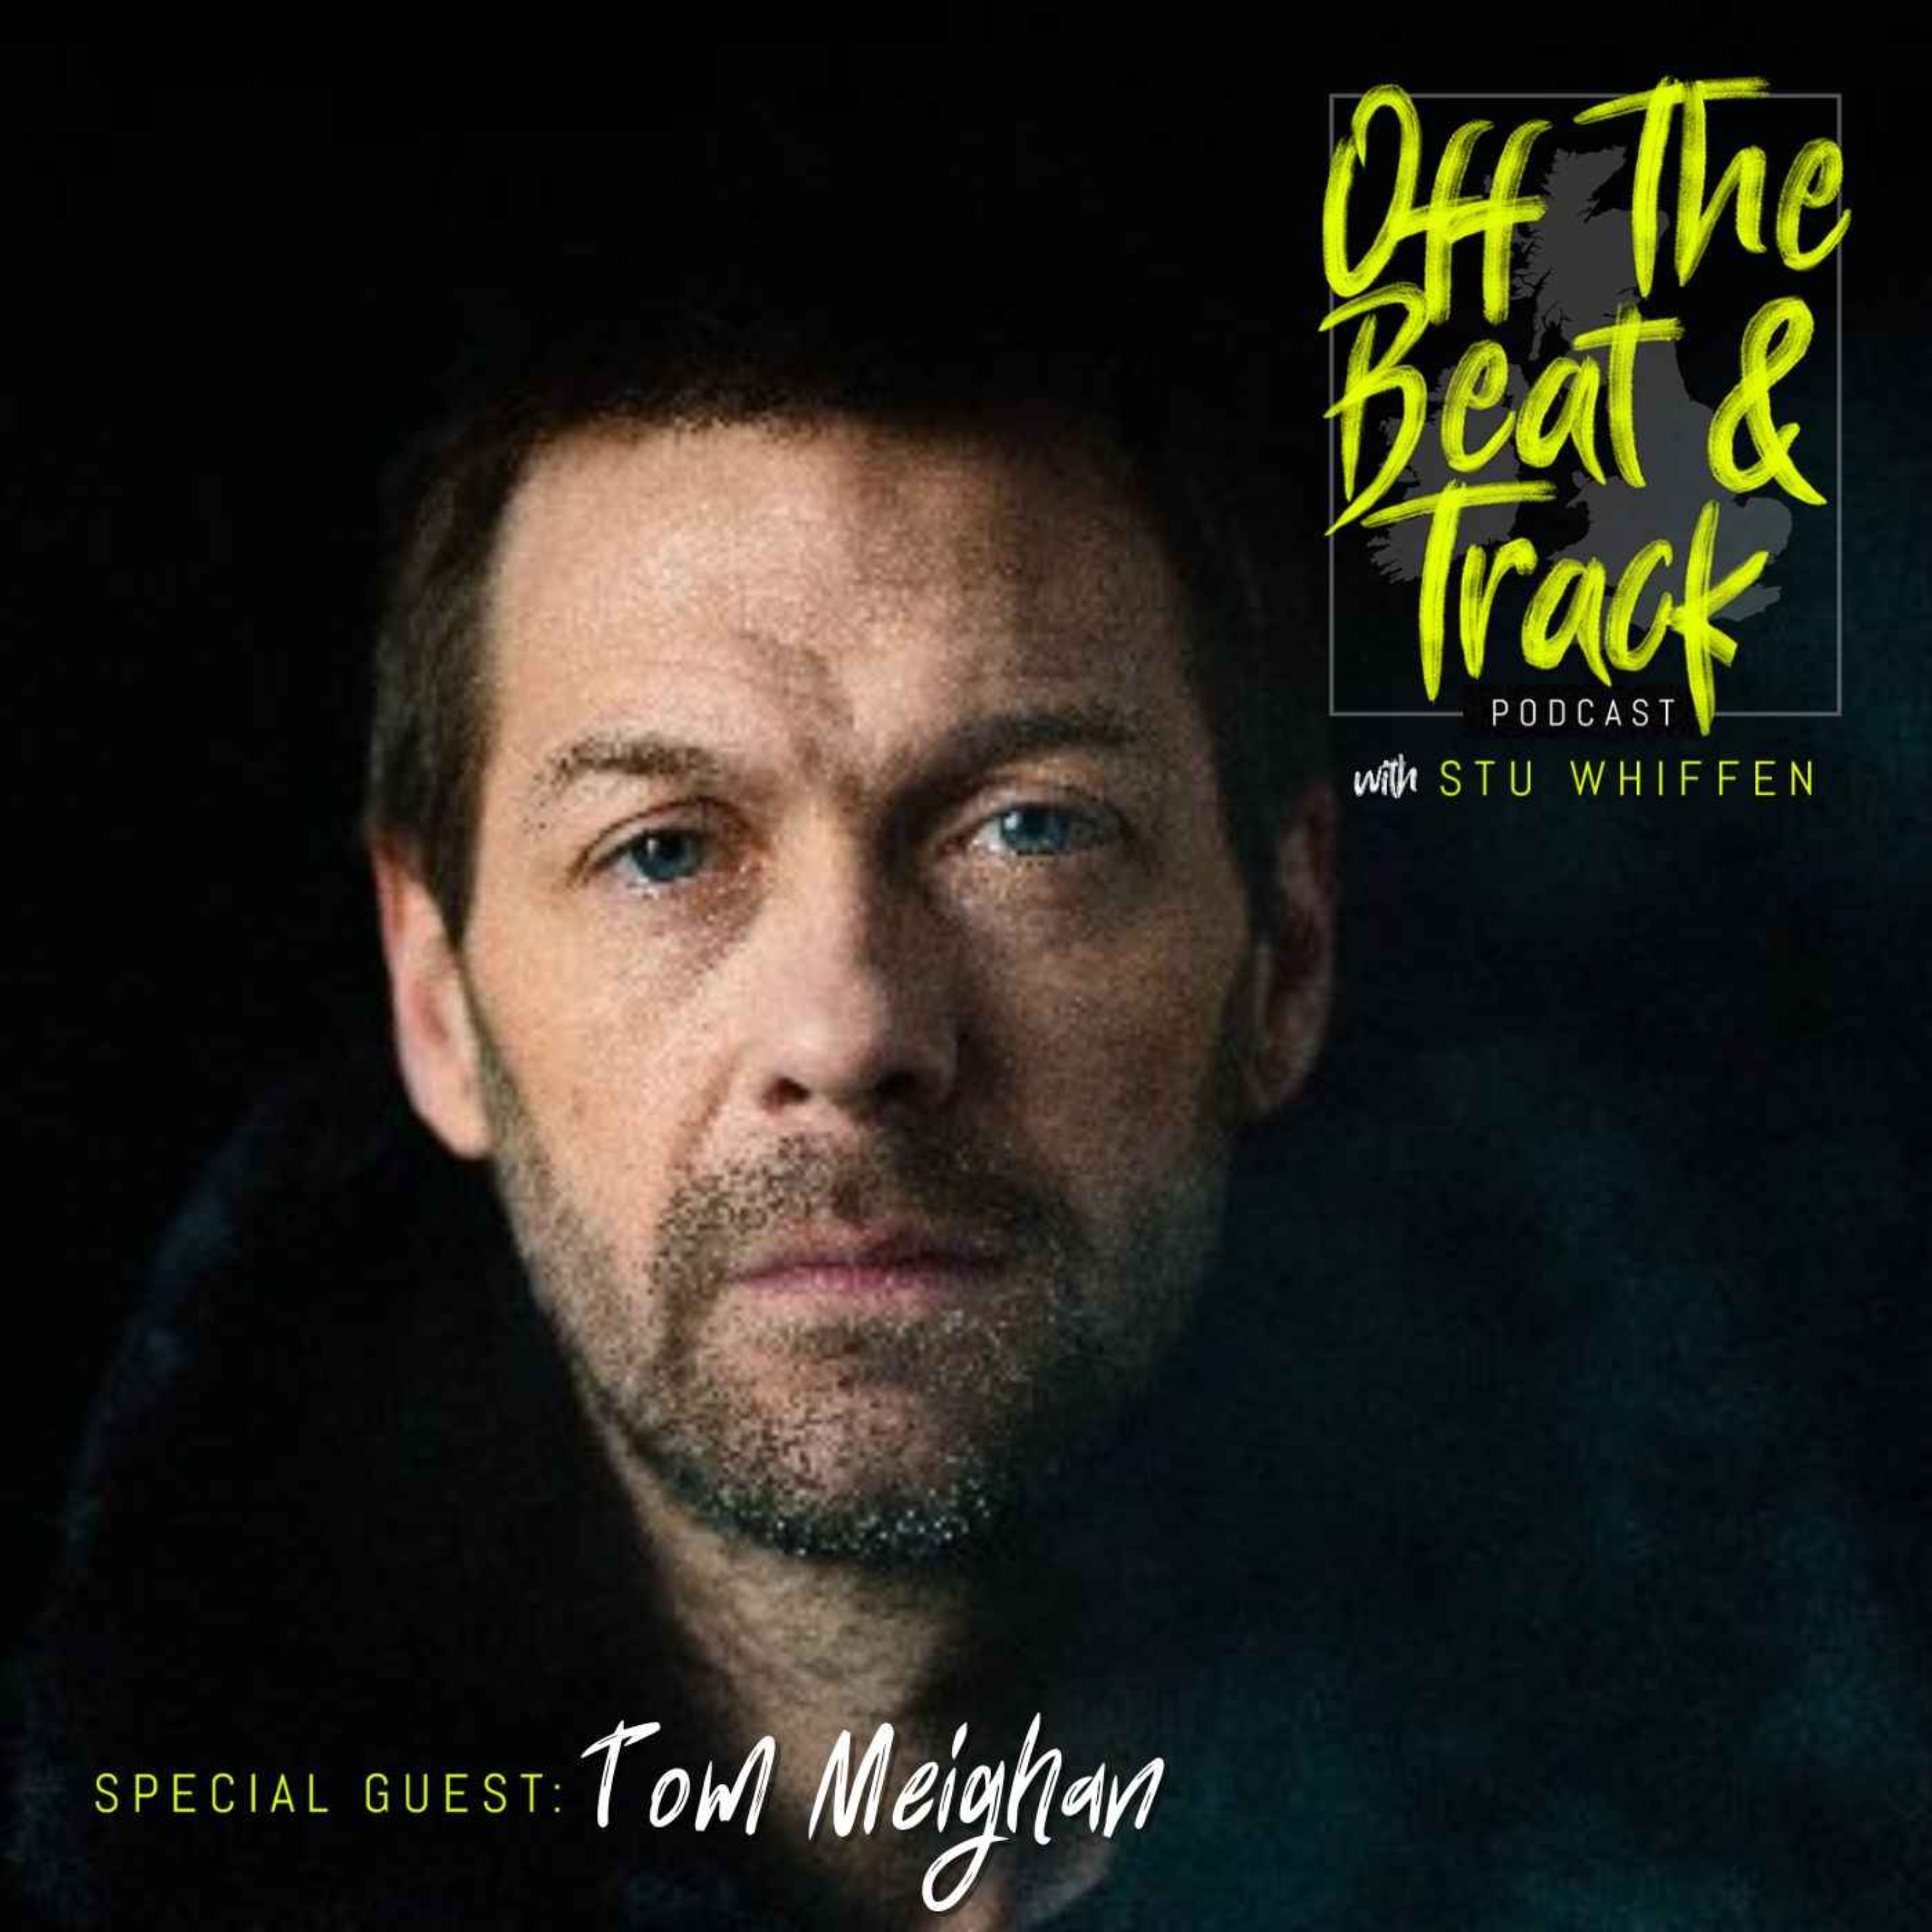 Special Guest - Tom Meighan